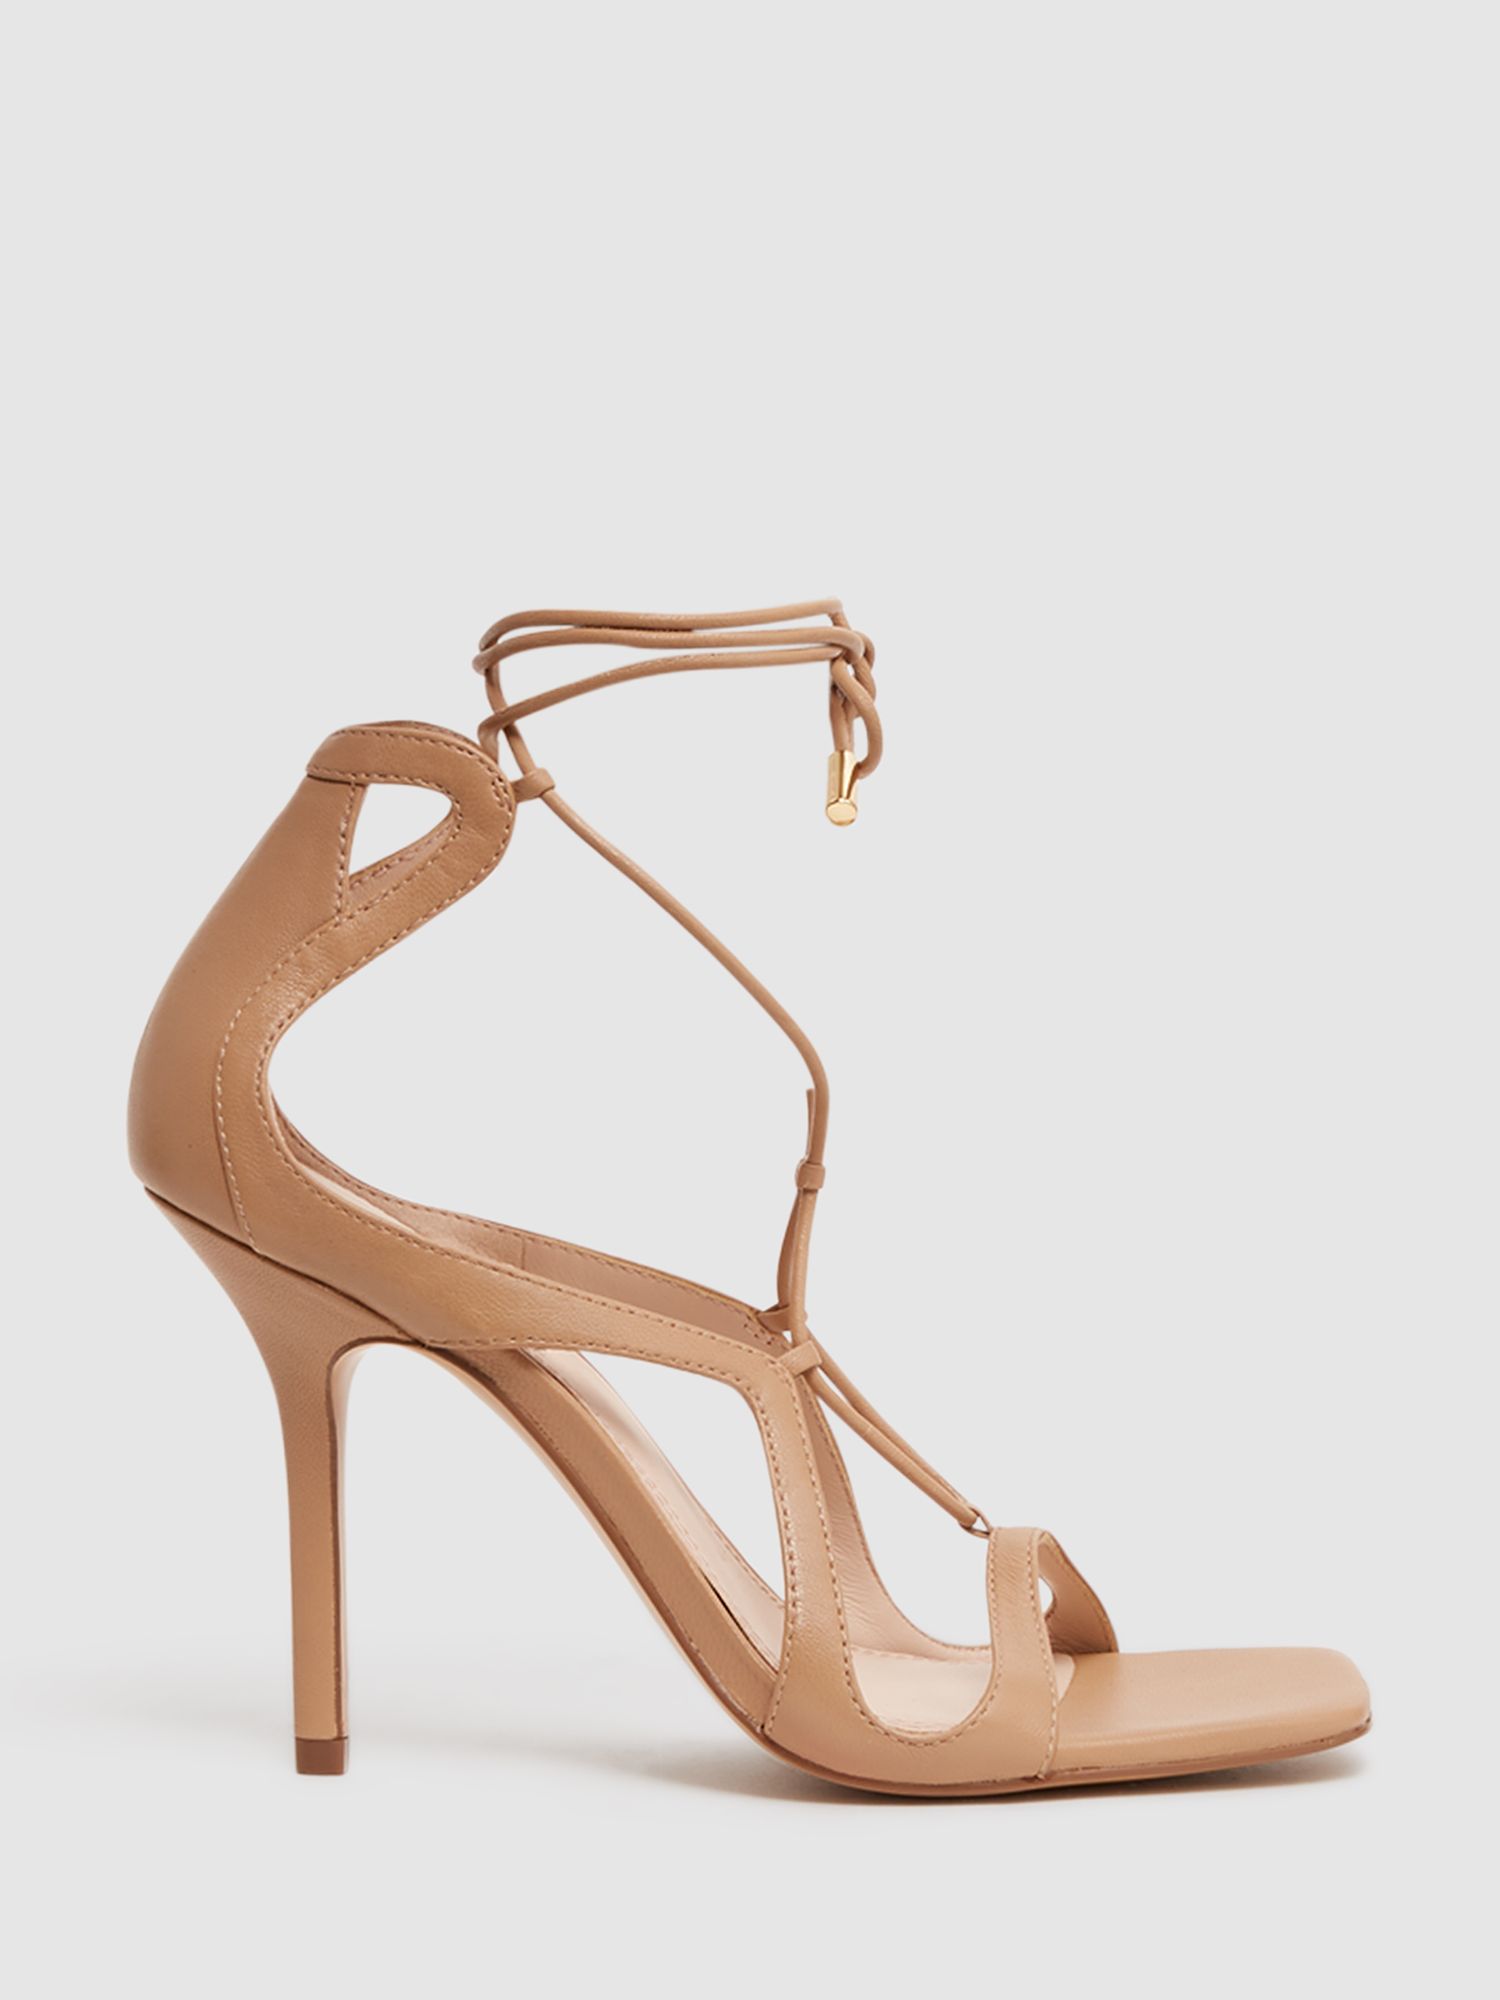 Nude Cross Strappy Ankle Strap Heels